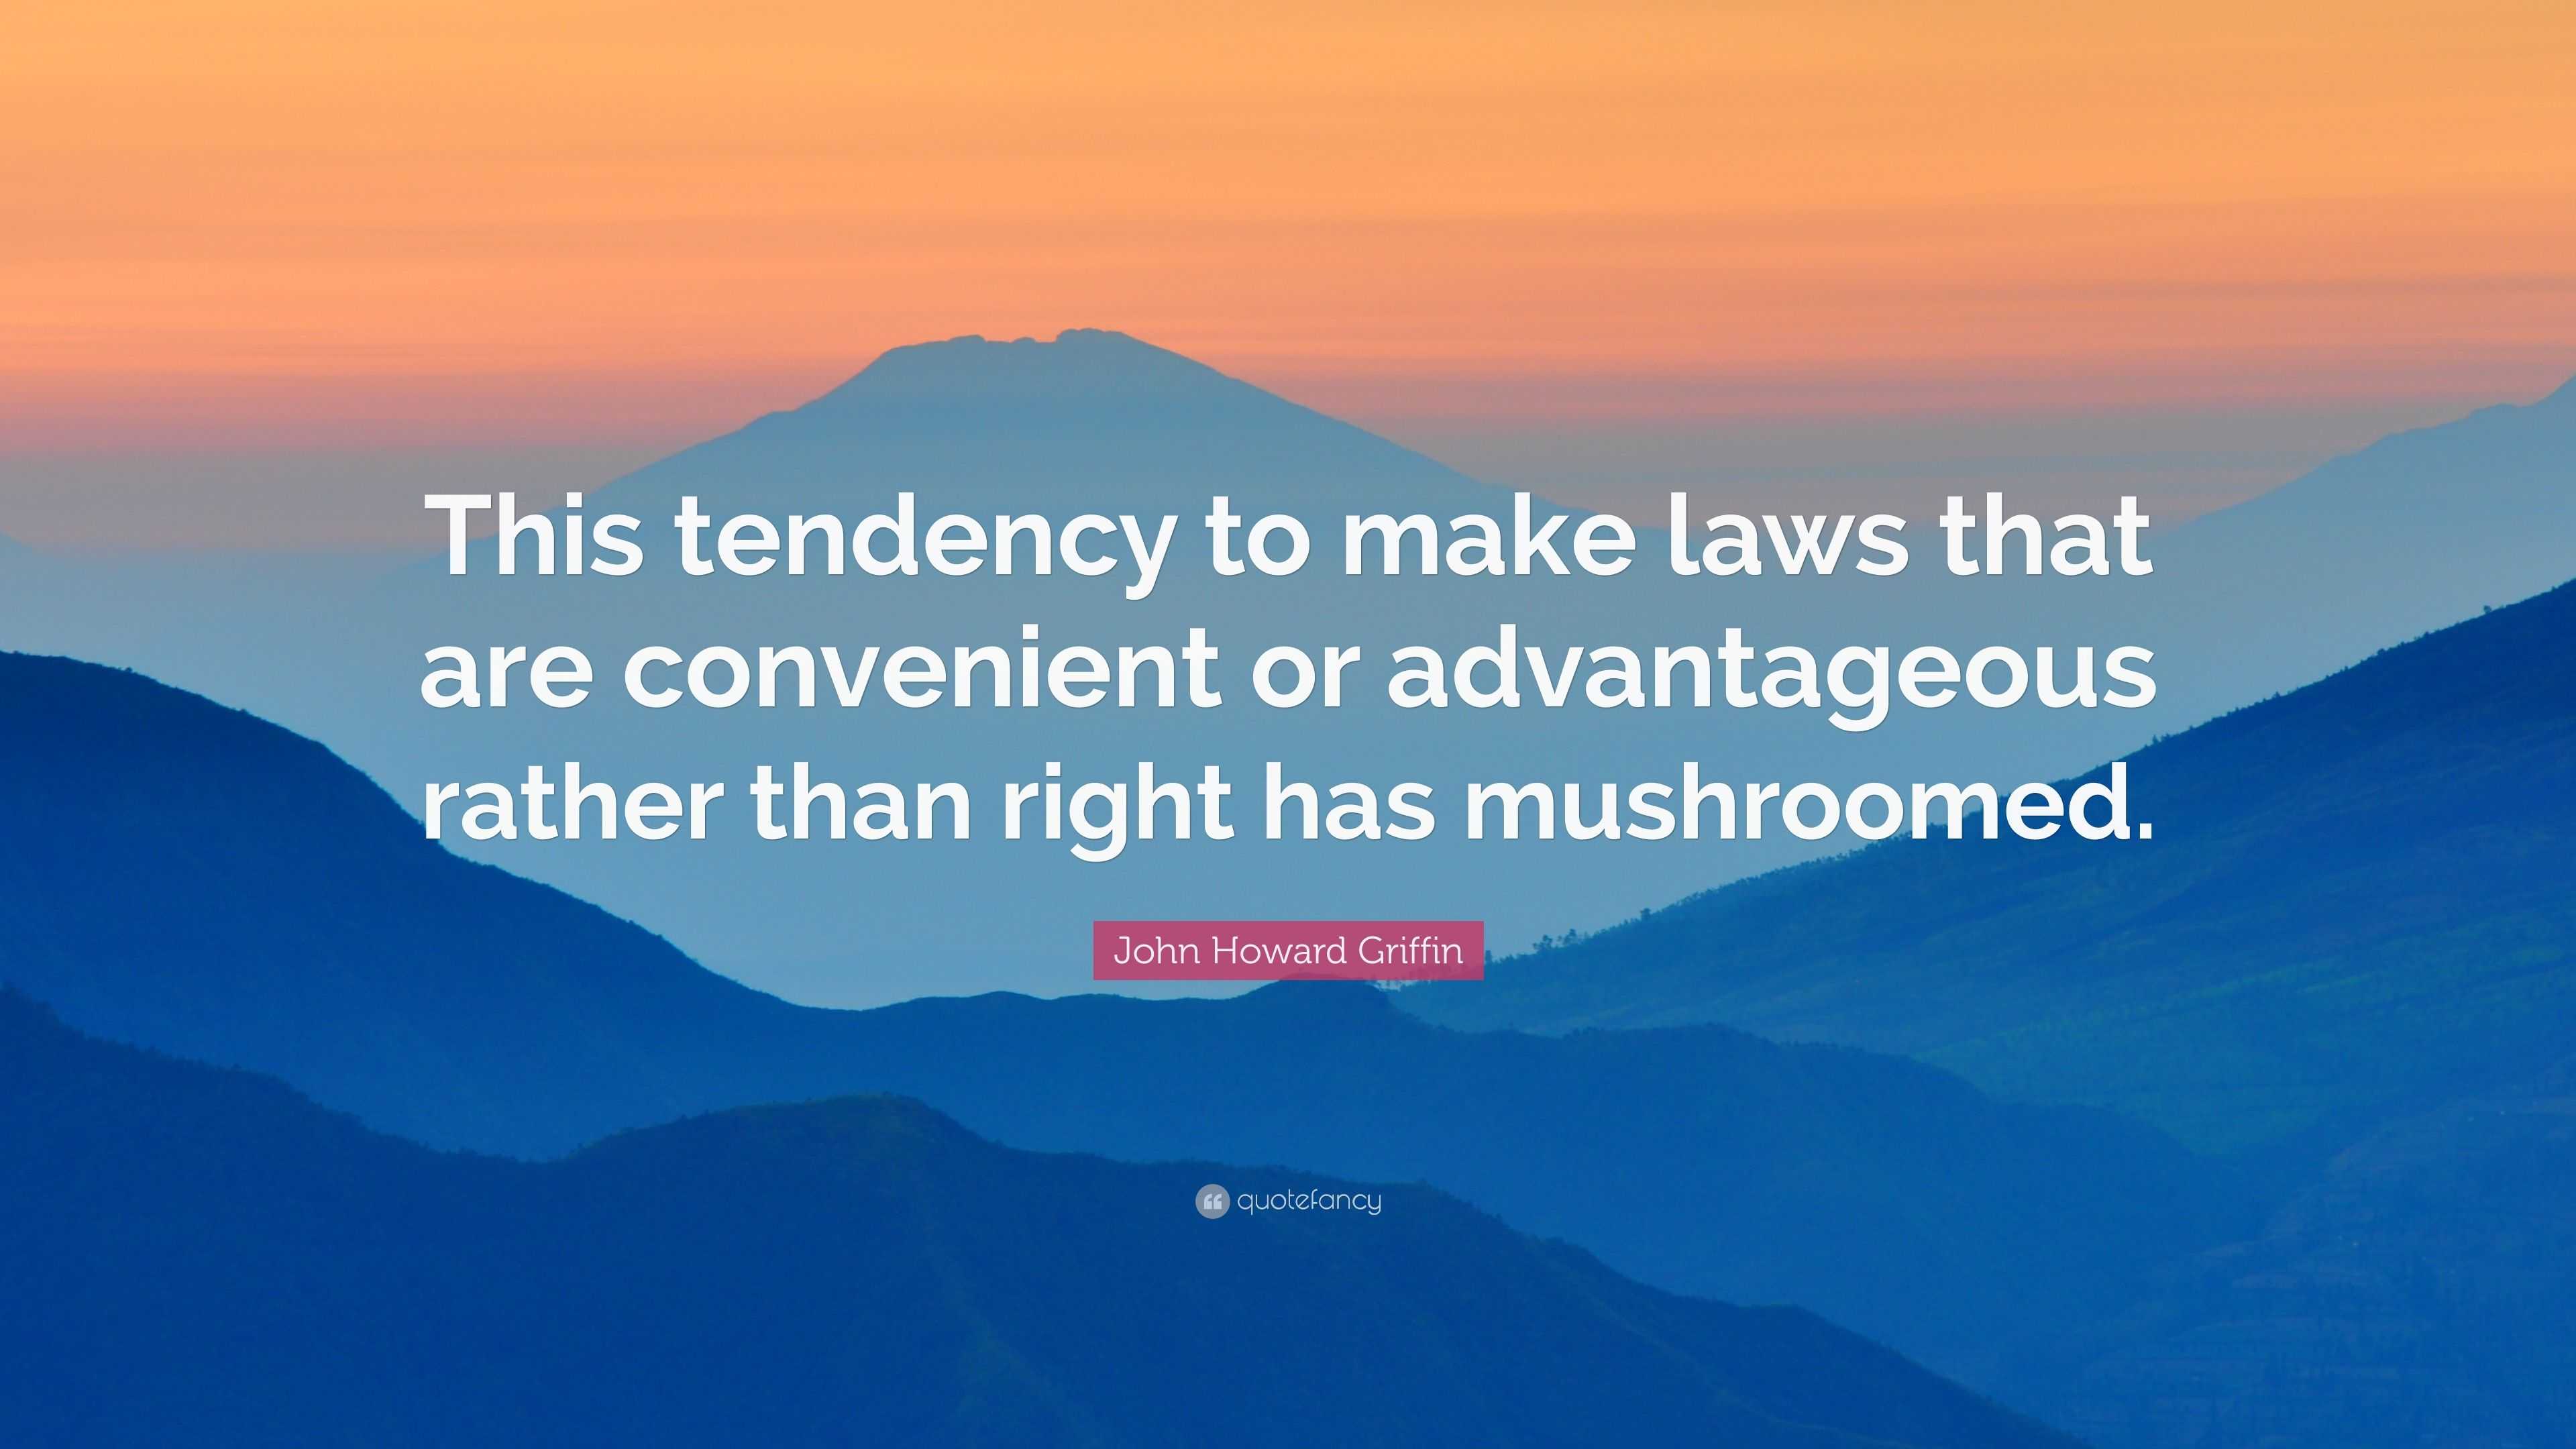 John Howard Griffin Quote: "This tendency to make laws ...